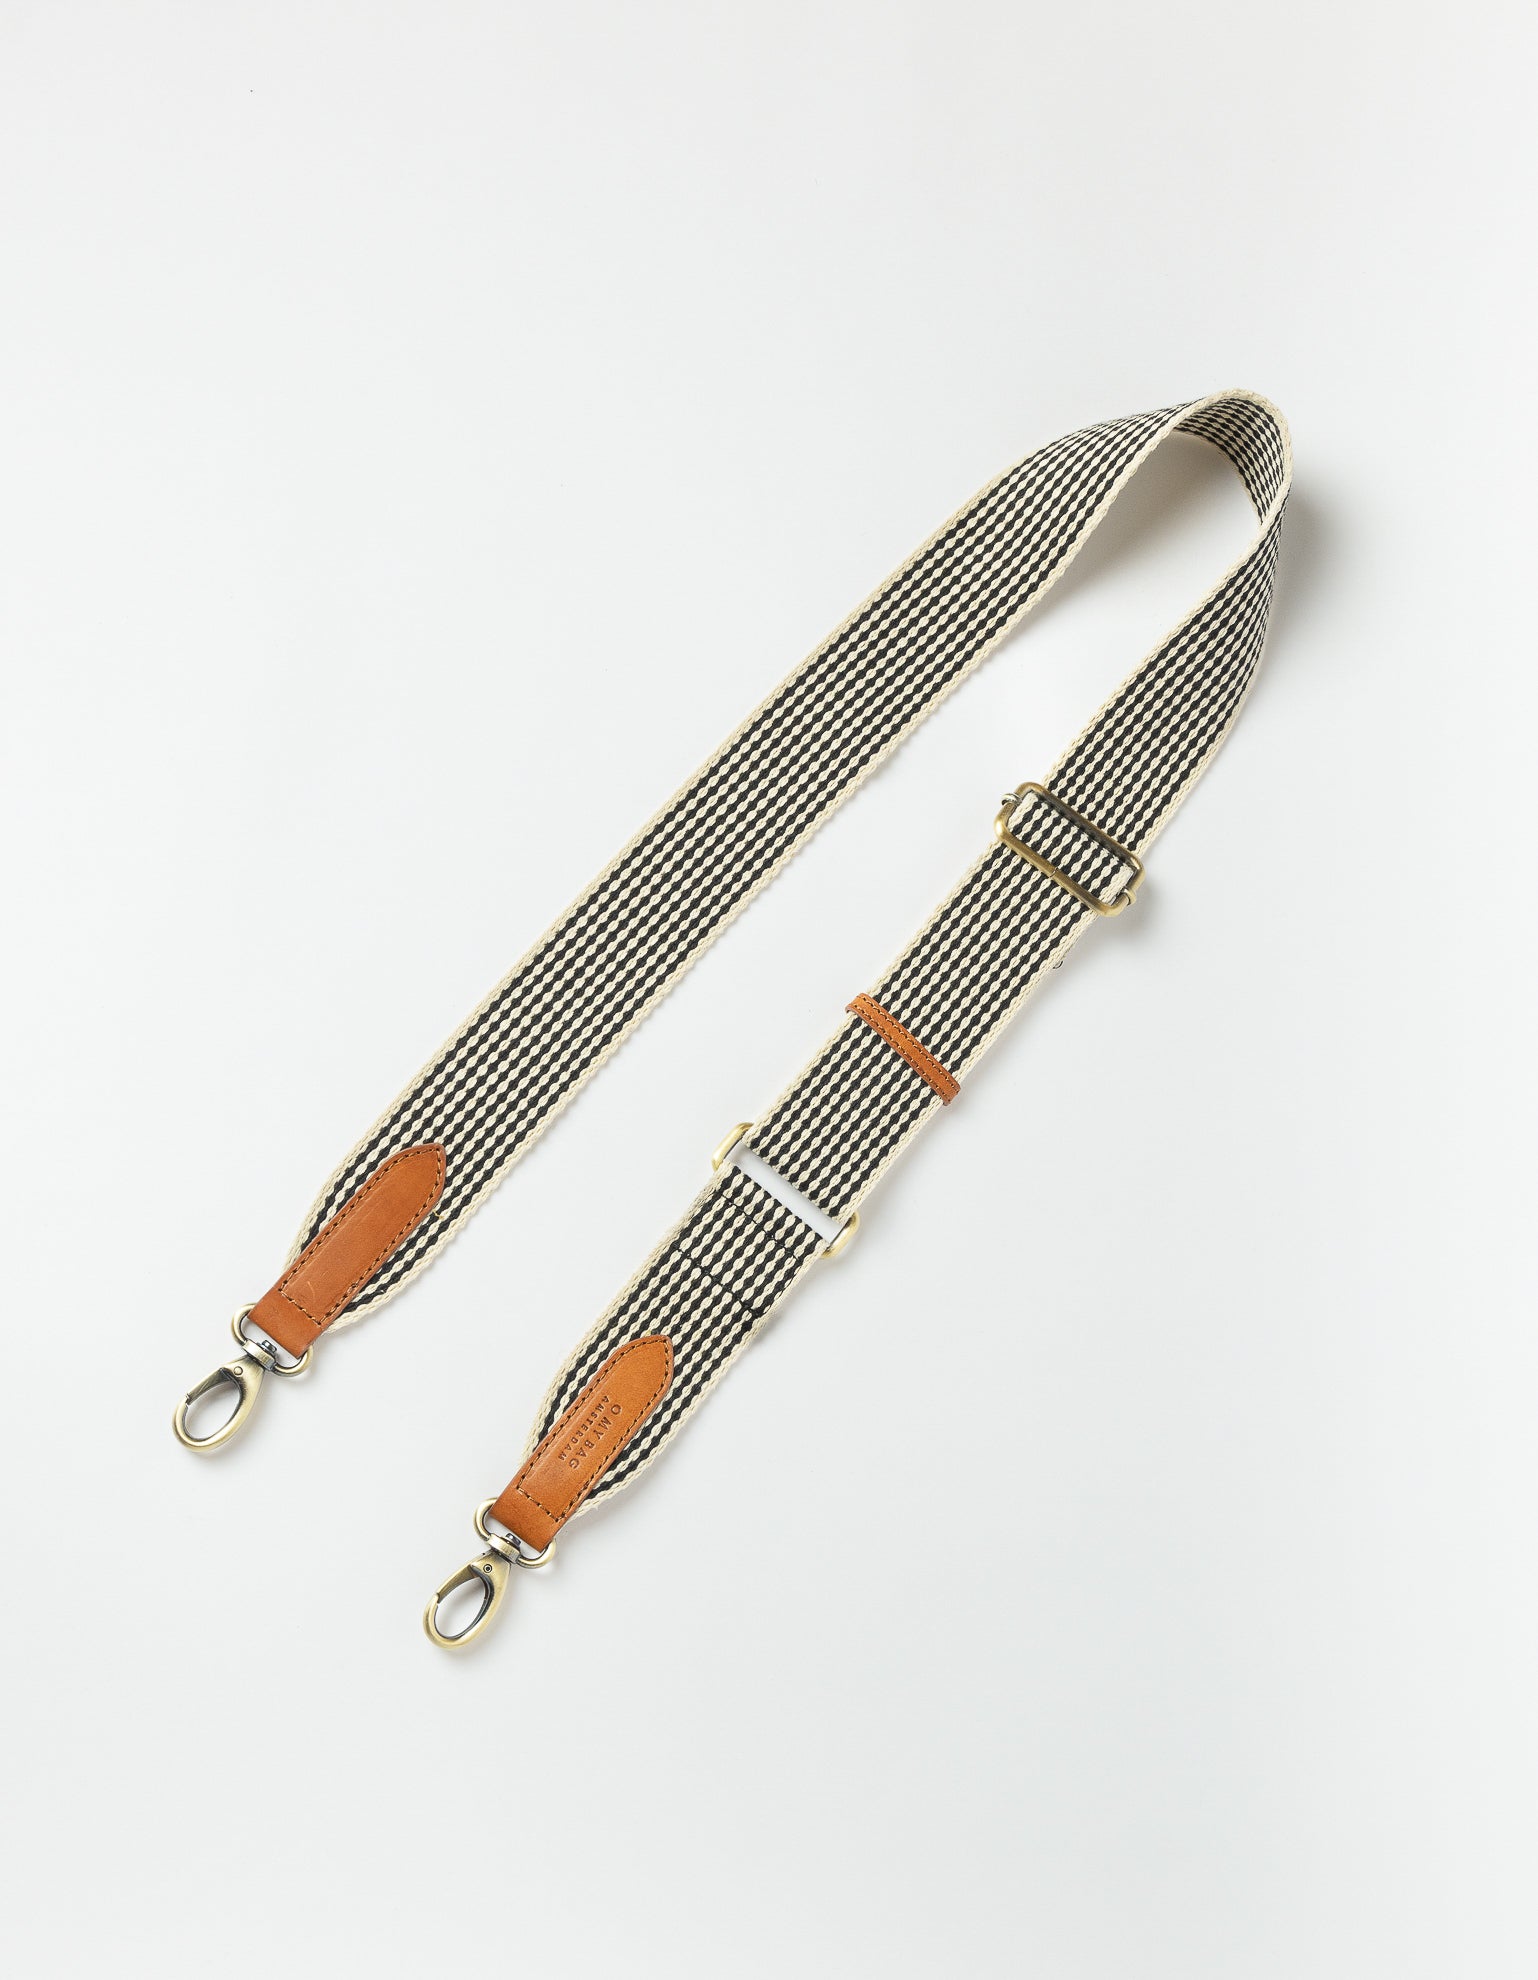 Webbing Strap Black Checkered with cognac Leather, second product image